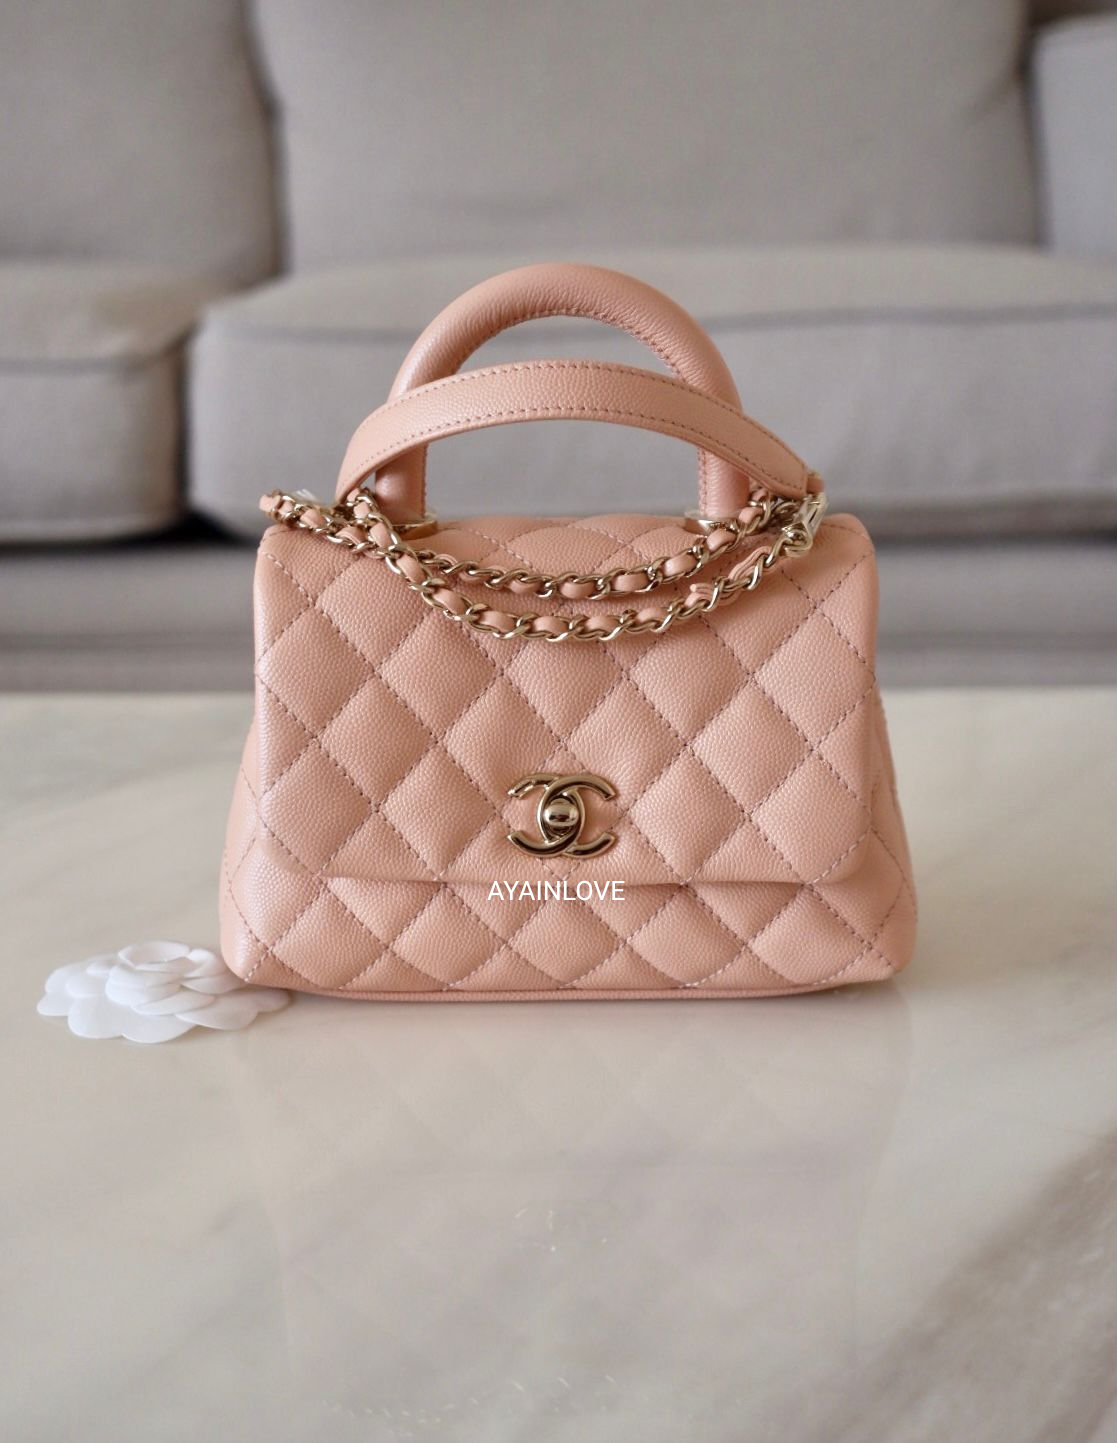 Chanel Coco Handle pink Caviar Small Bag pink gold hw